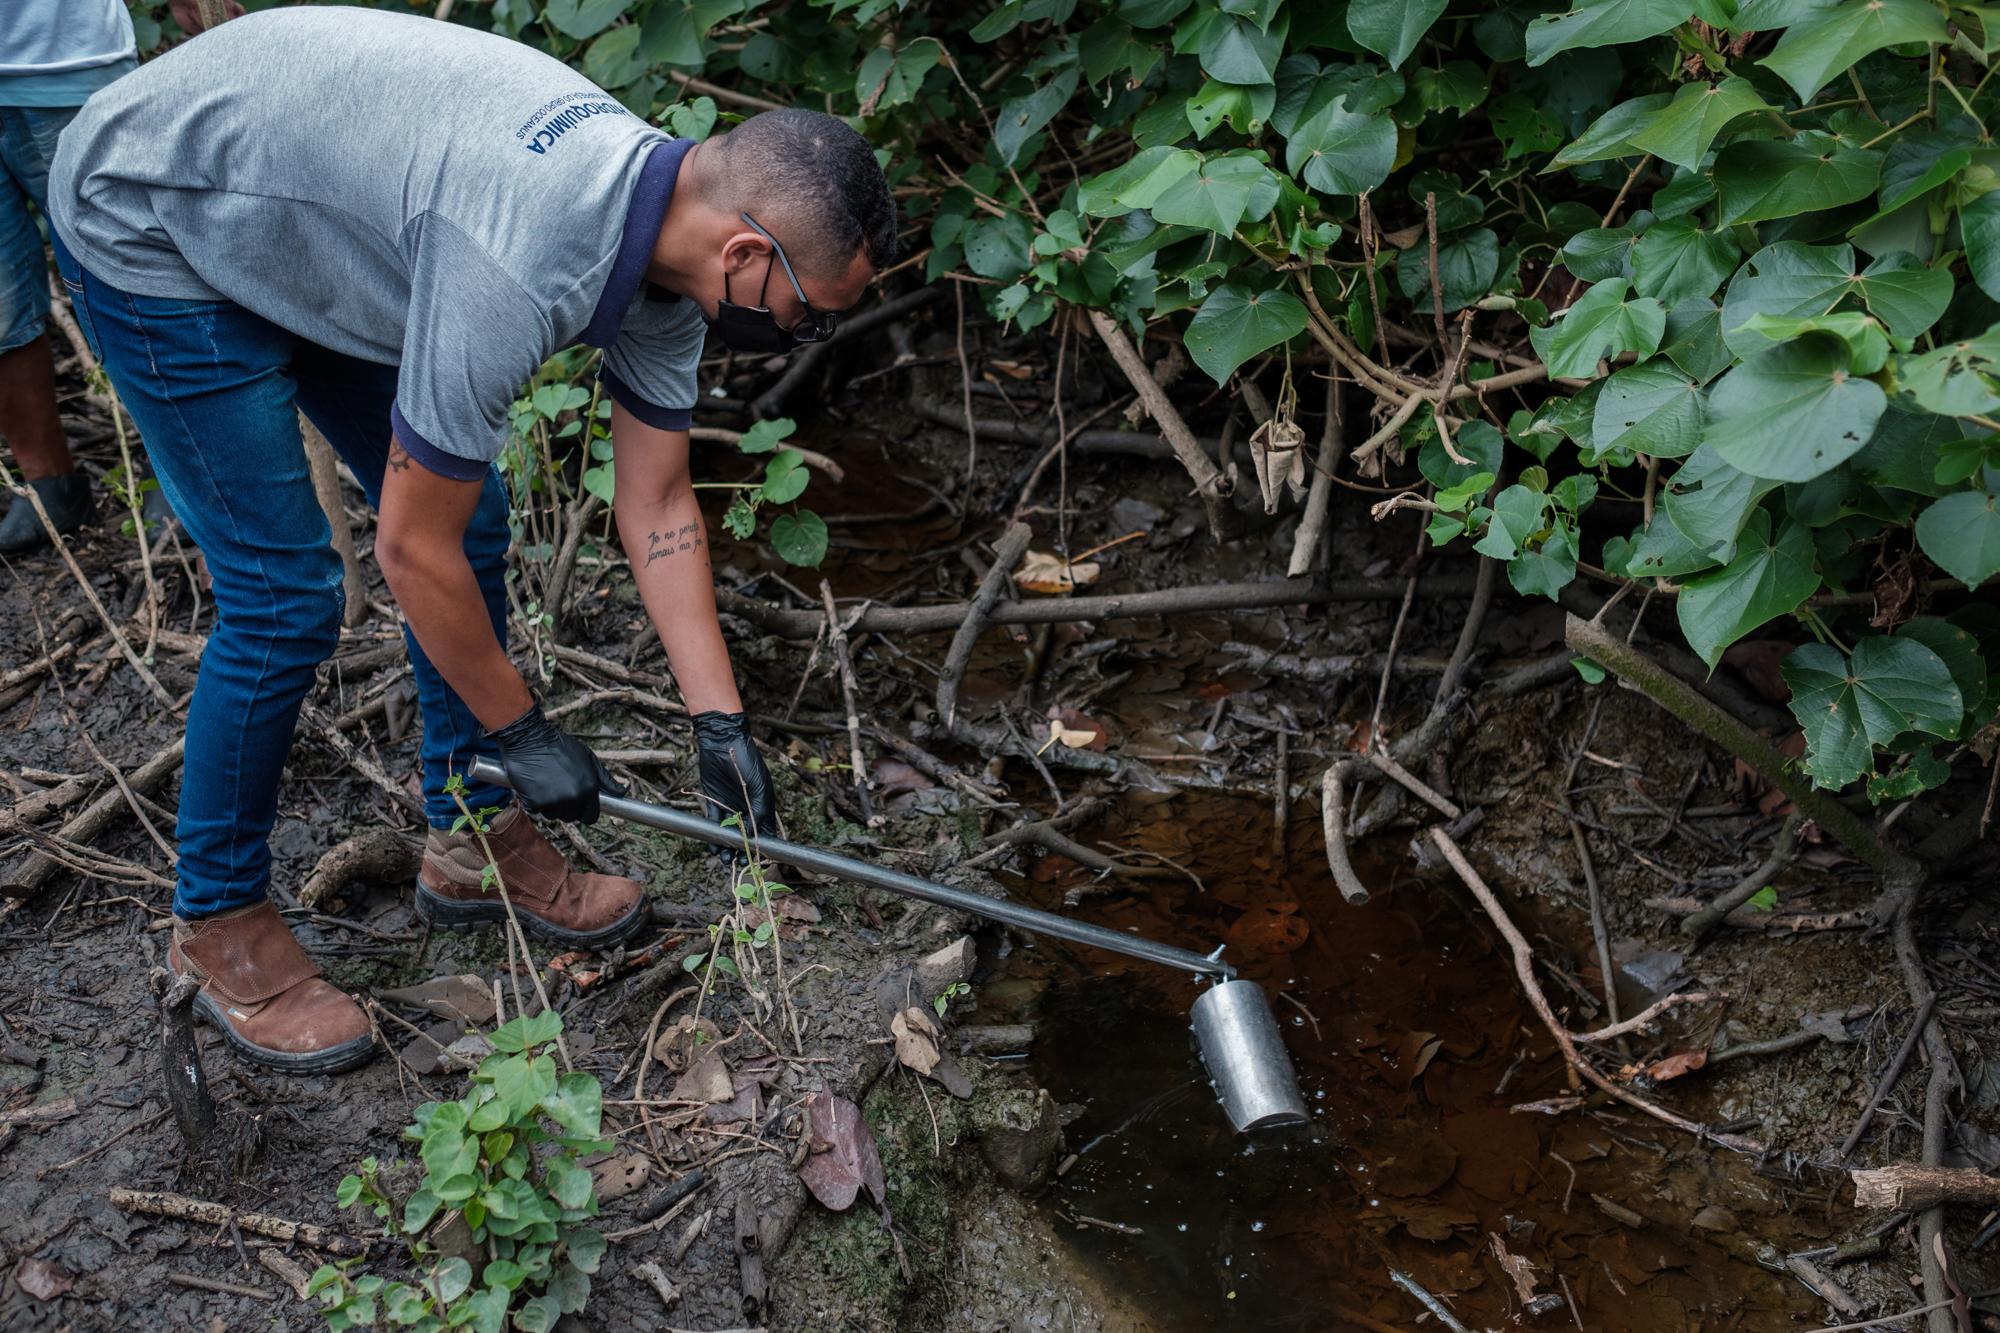 A bio-technician takes a sample of polluted water thought to be leeched from a nearby clandestine...